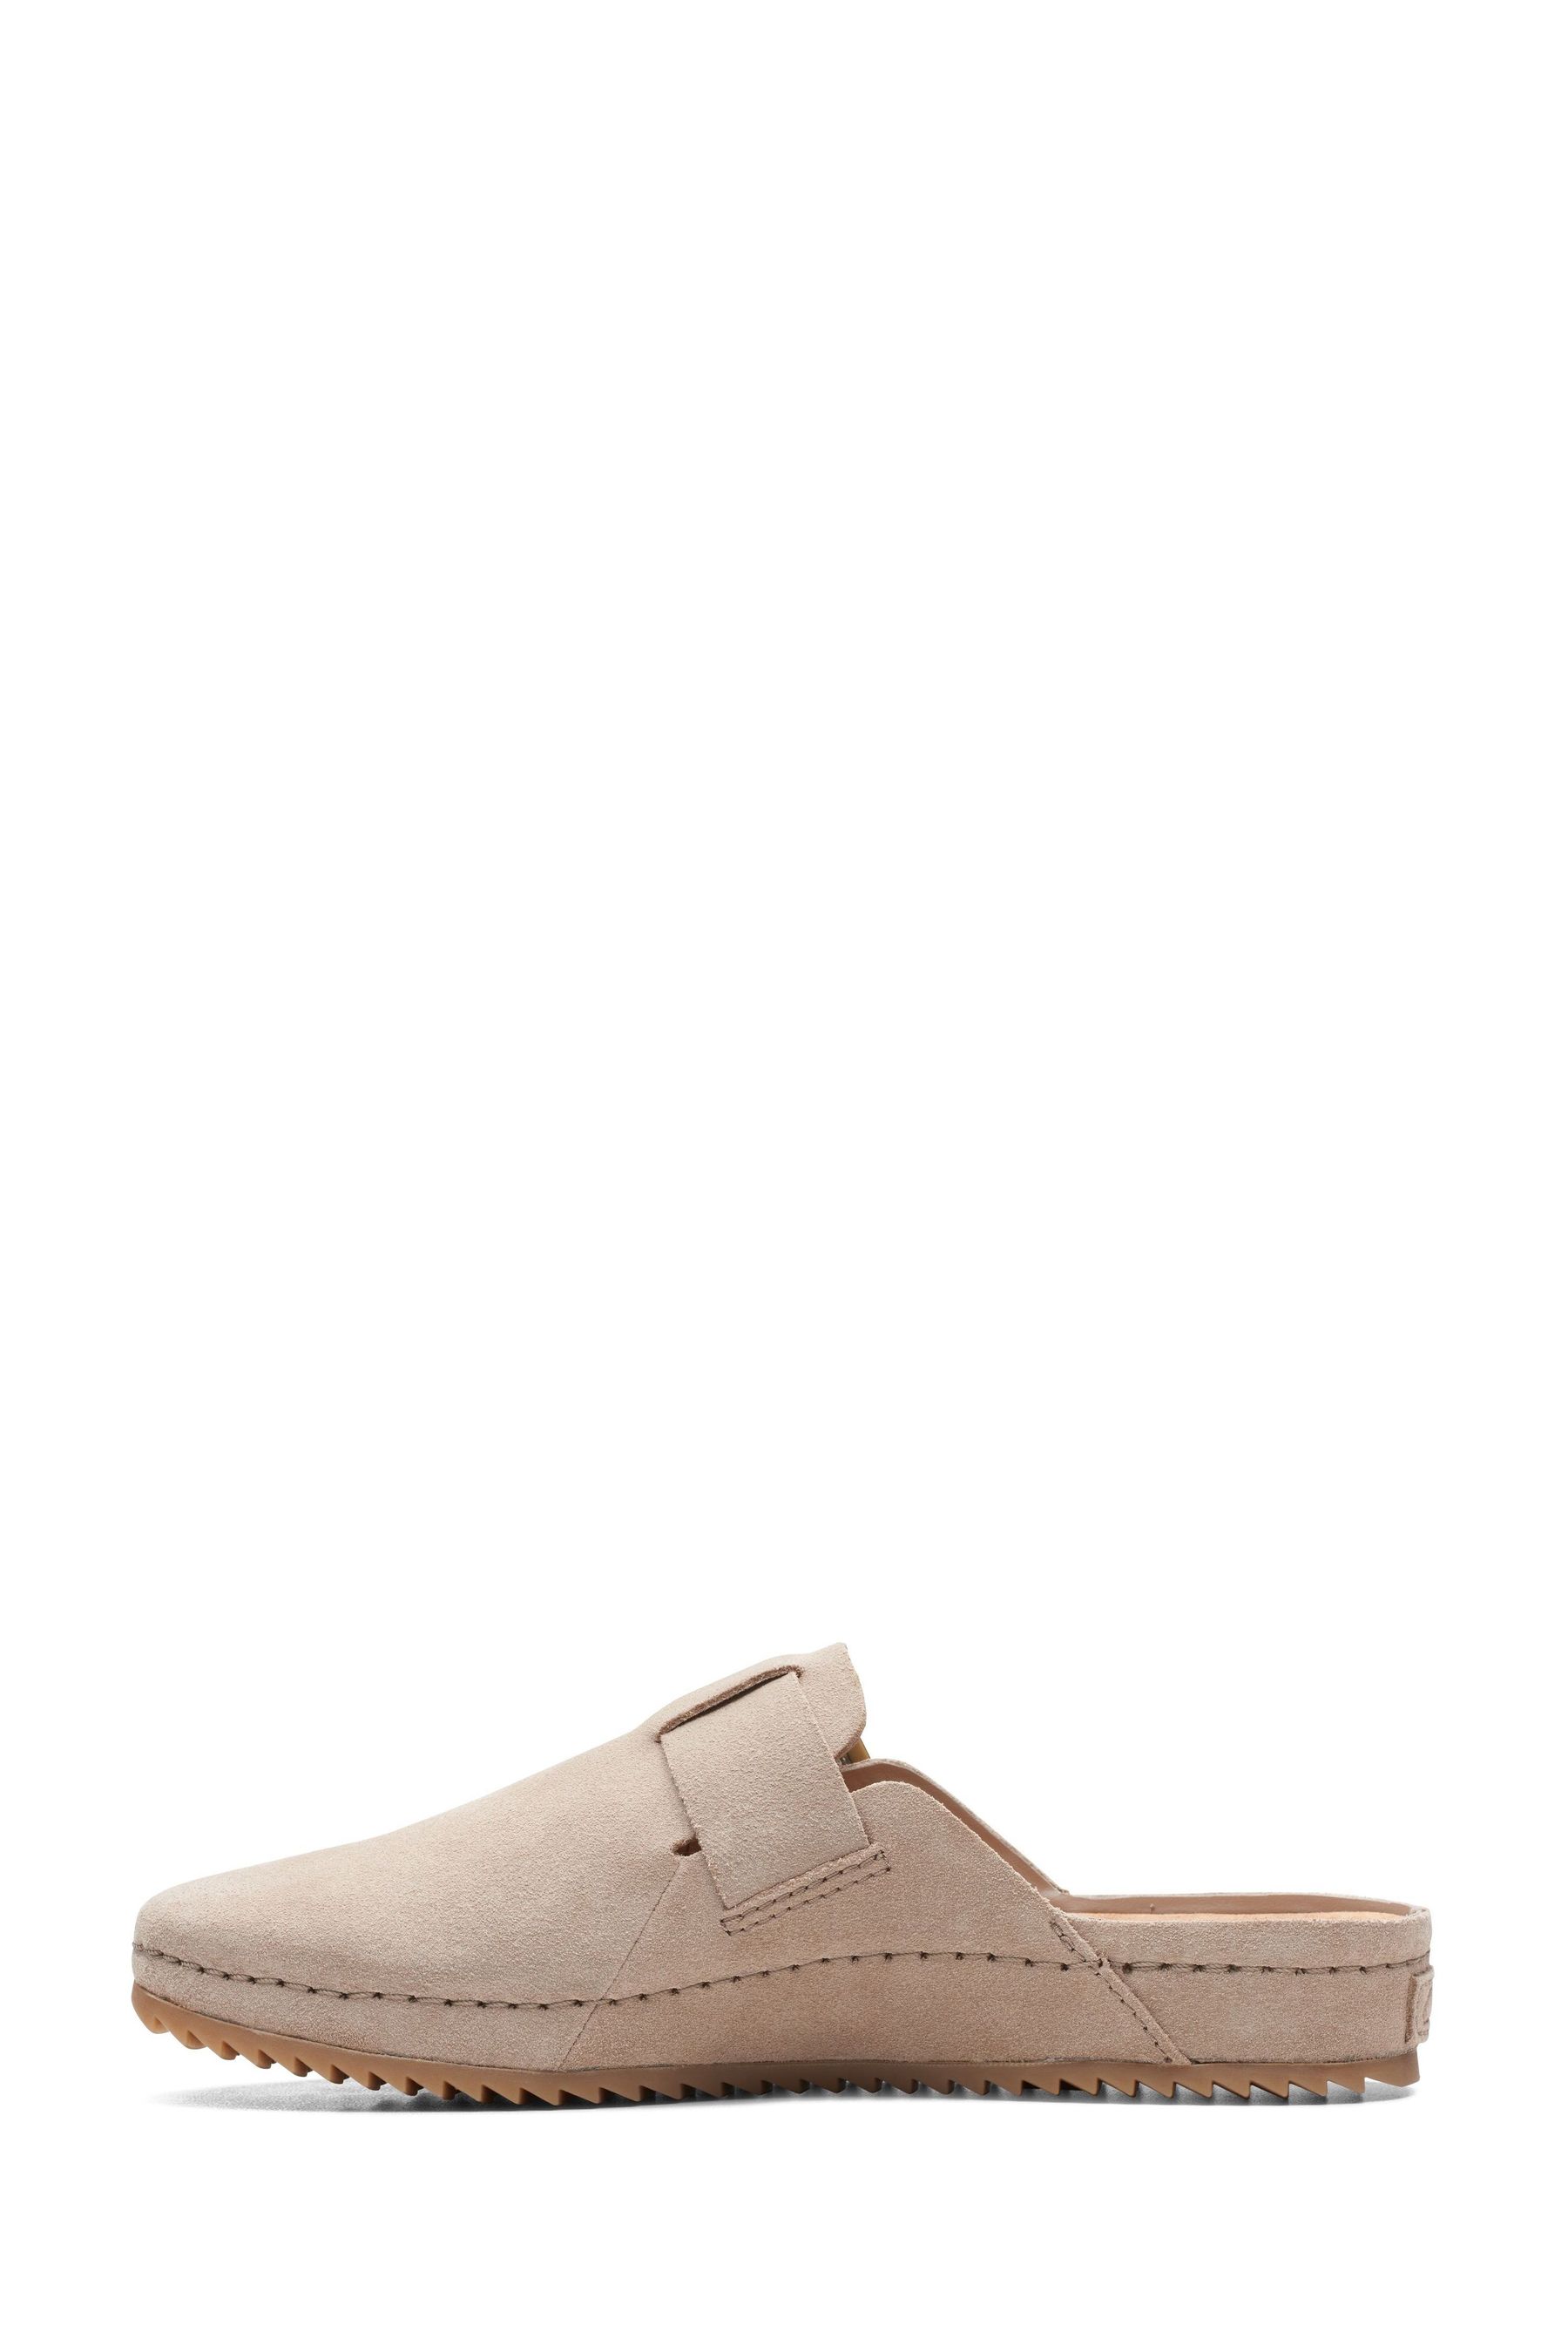 Buy Clarks Natural Suede Brookleigh Mule Shoes from the Next UK online shop